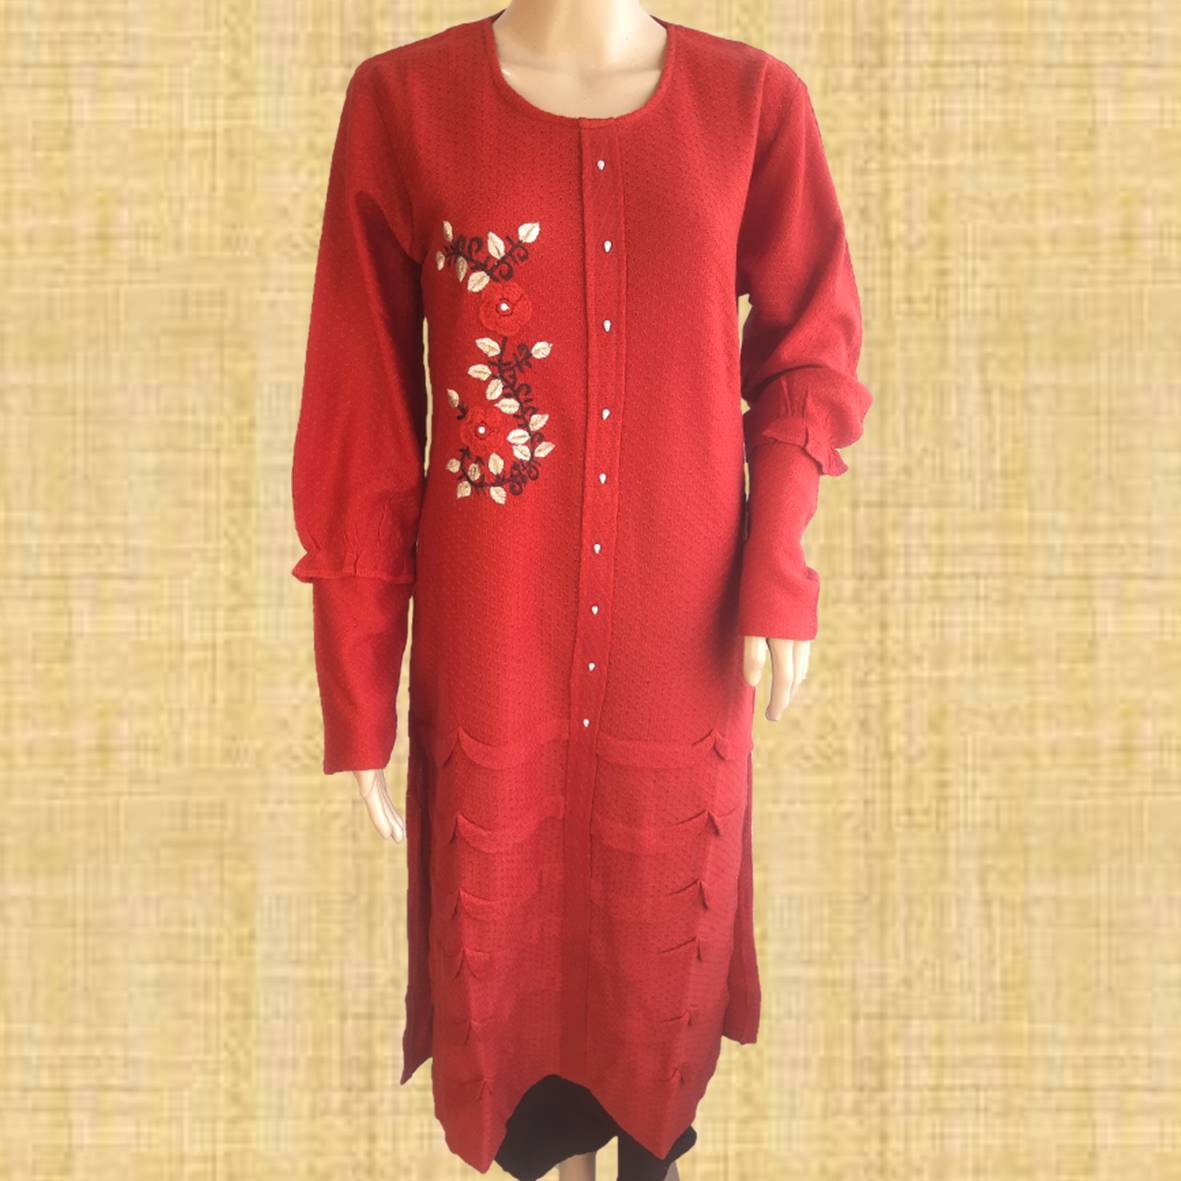 All Woolen Kurti Fabric at Best Price in Ludhiana | R. S. Textiles